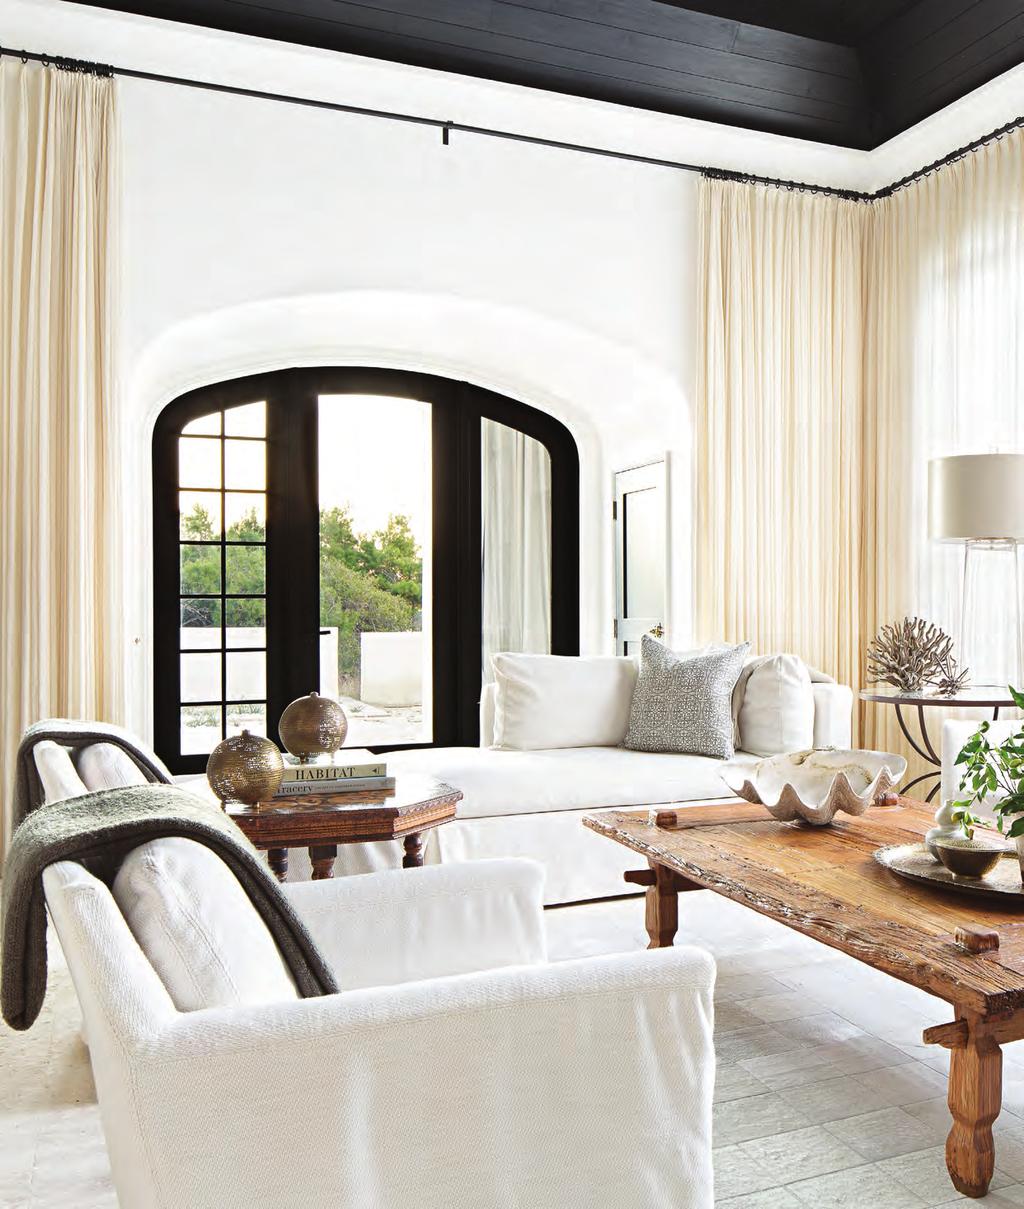 THIS PHOTO: Ebony-stained ceiling planks and window frames ground the living room s airy furnishings. Walls are coated with a thin veneer of luminous plaster.